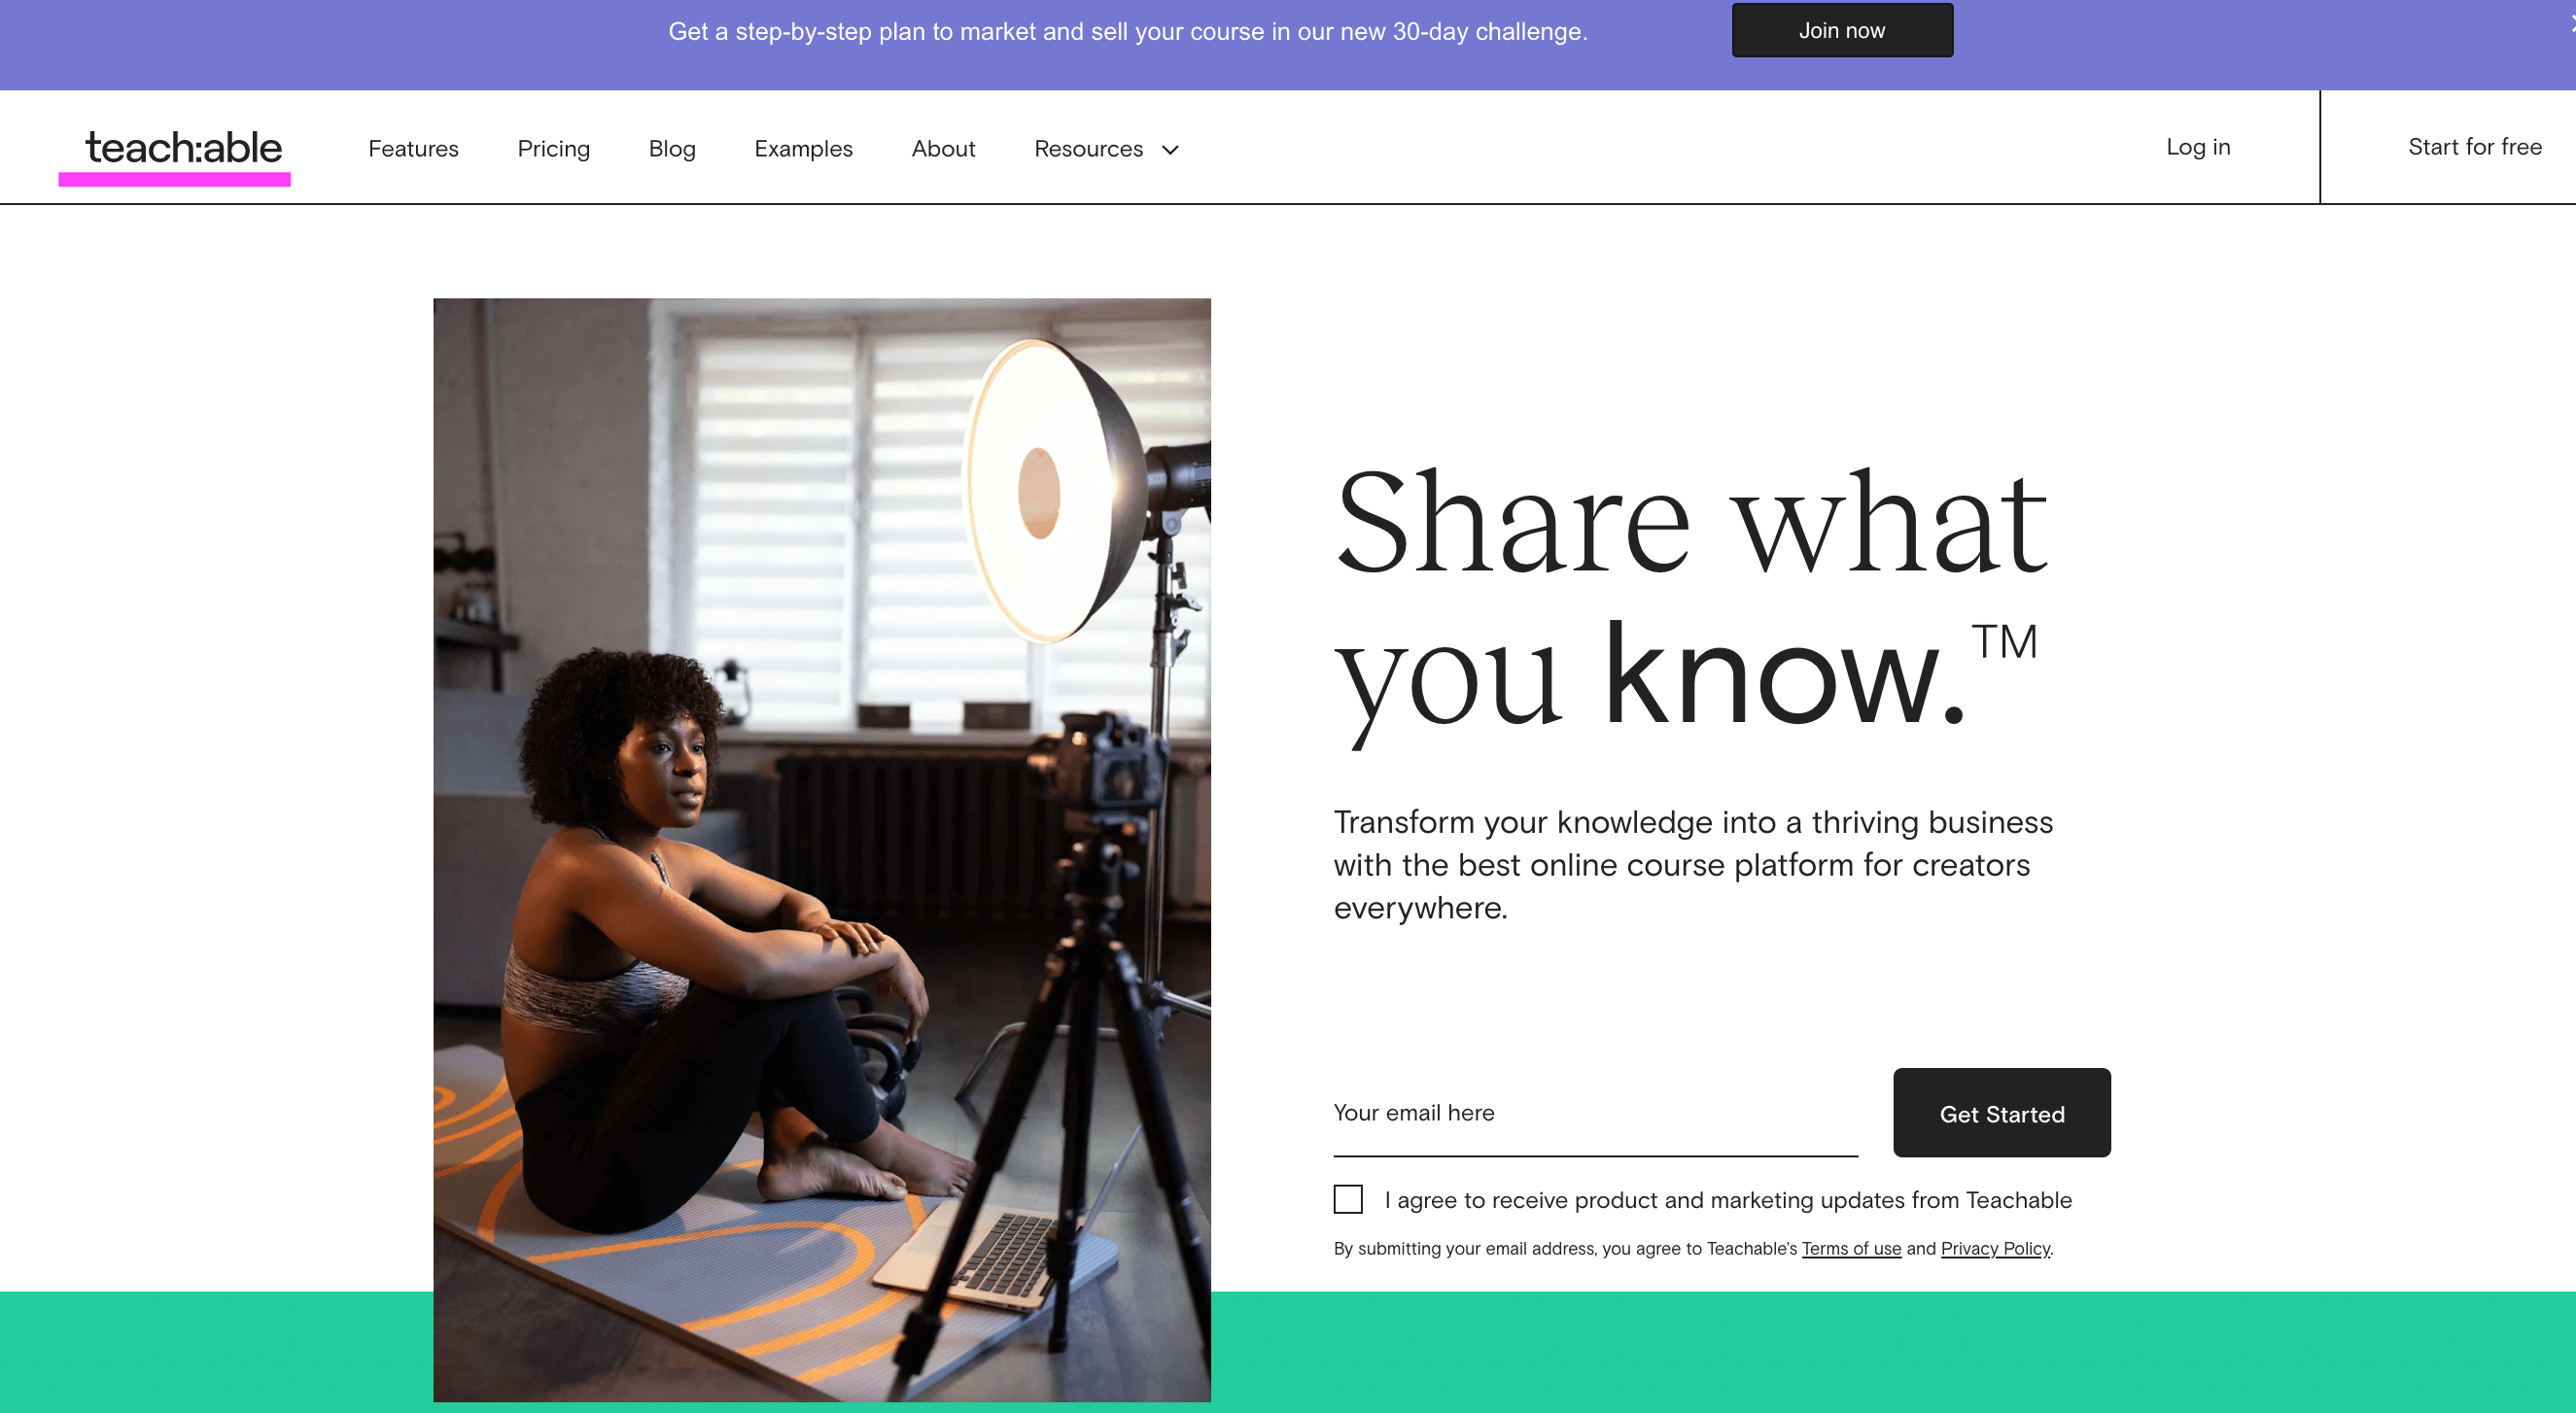 main page from teachable showing woman of color and creative background